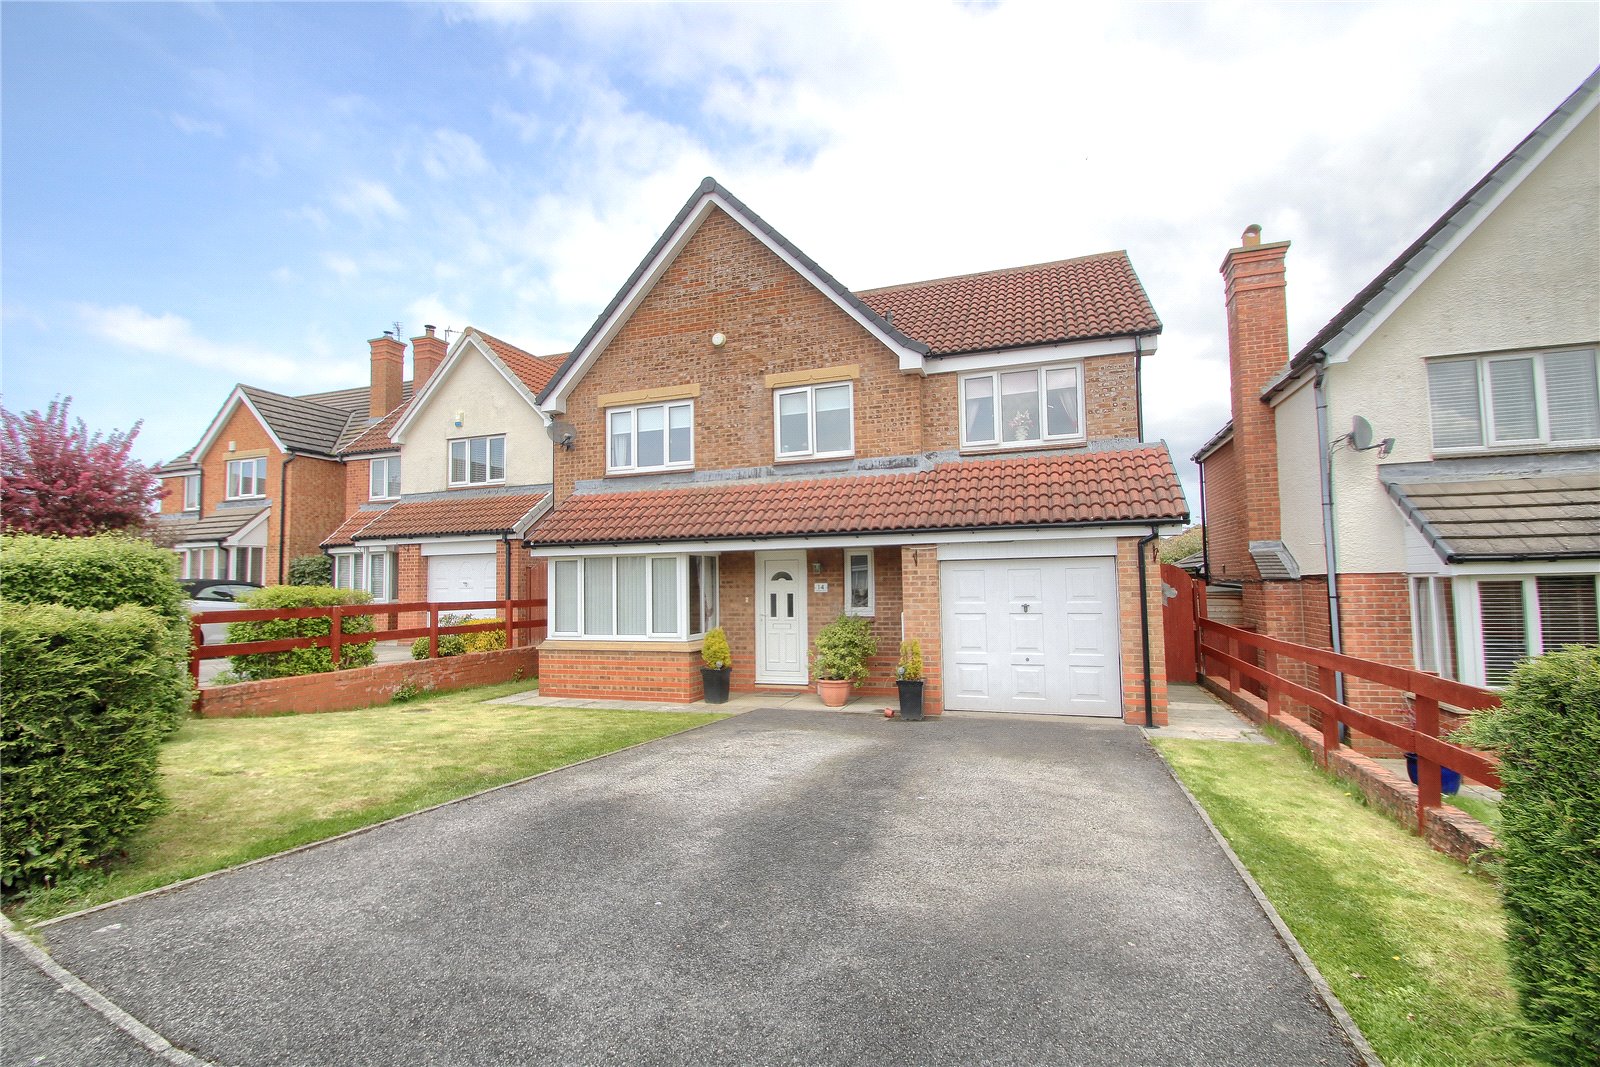 5 bed house for sale  - Property Image 1